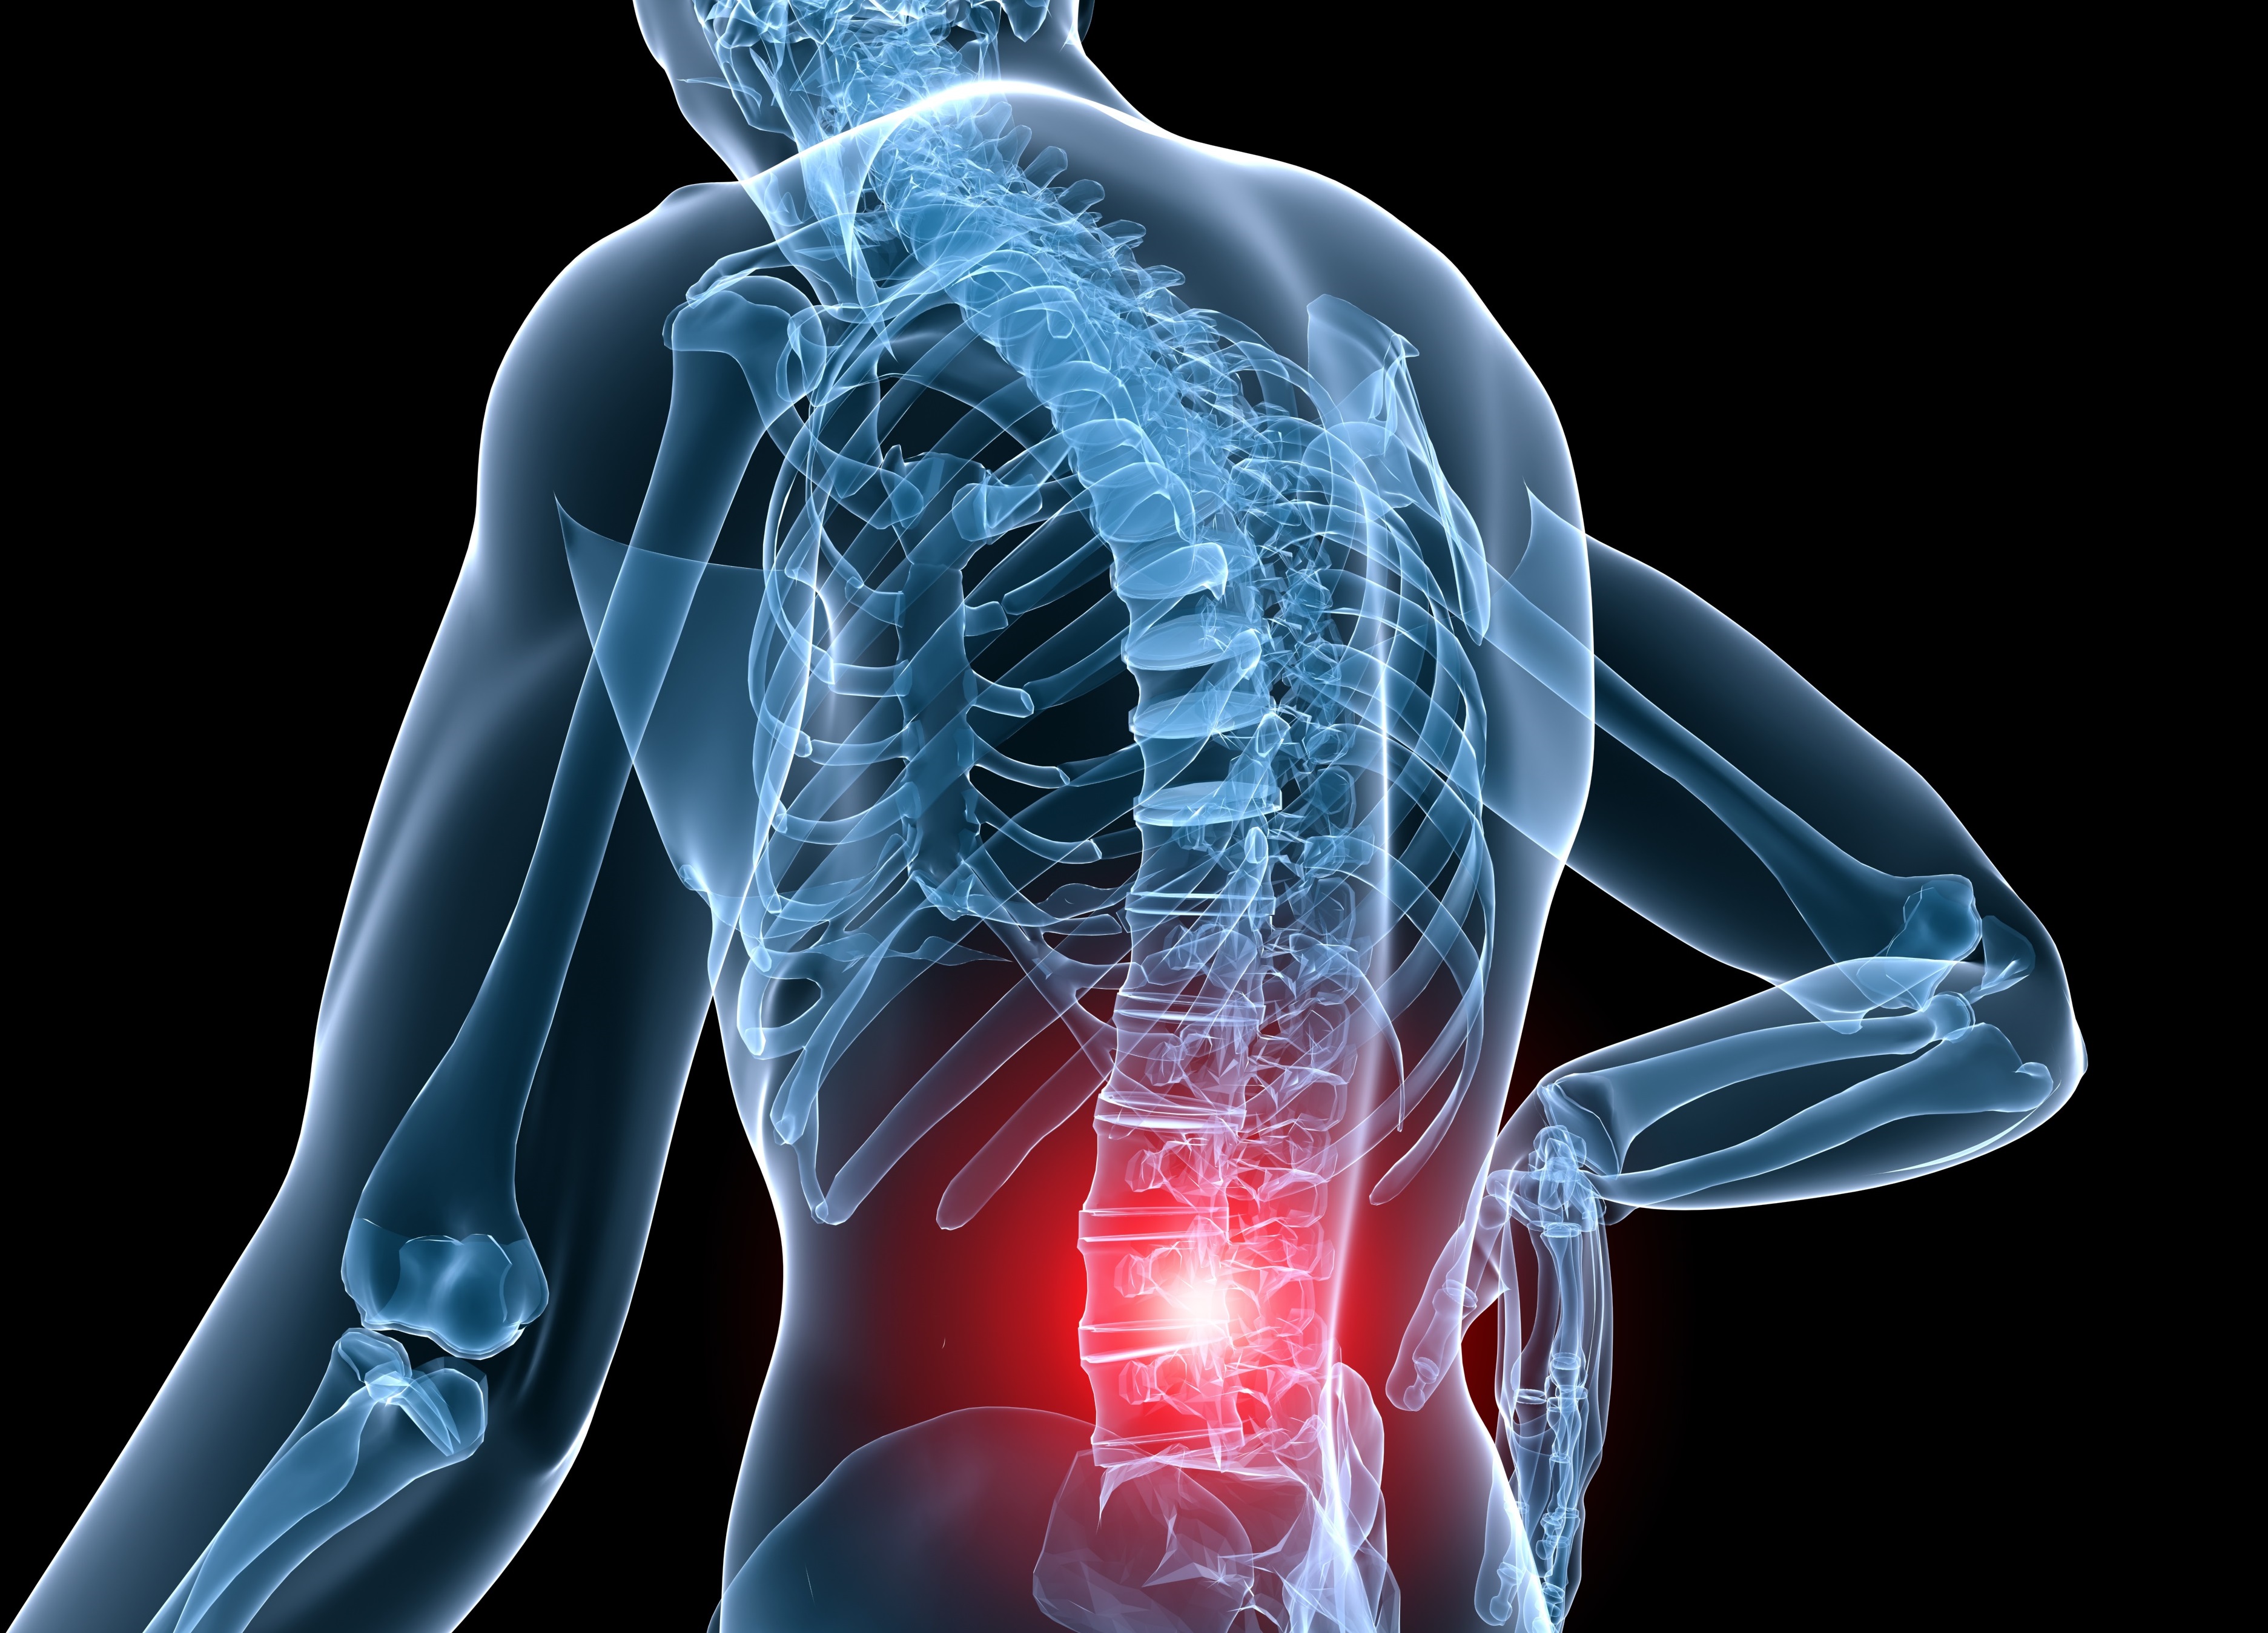 Lower pain in back